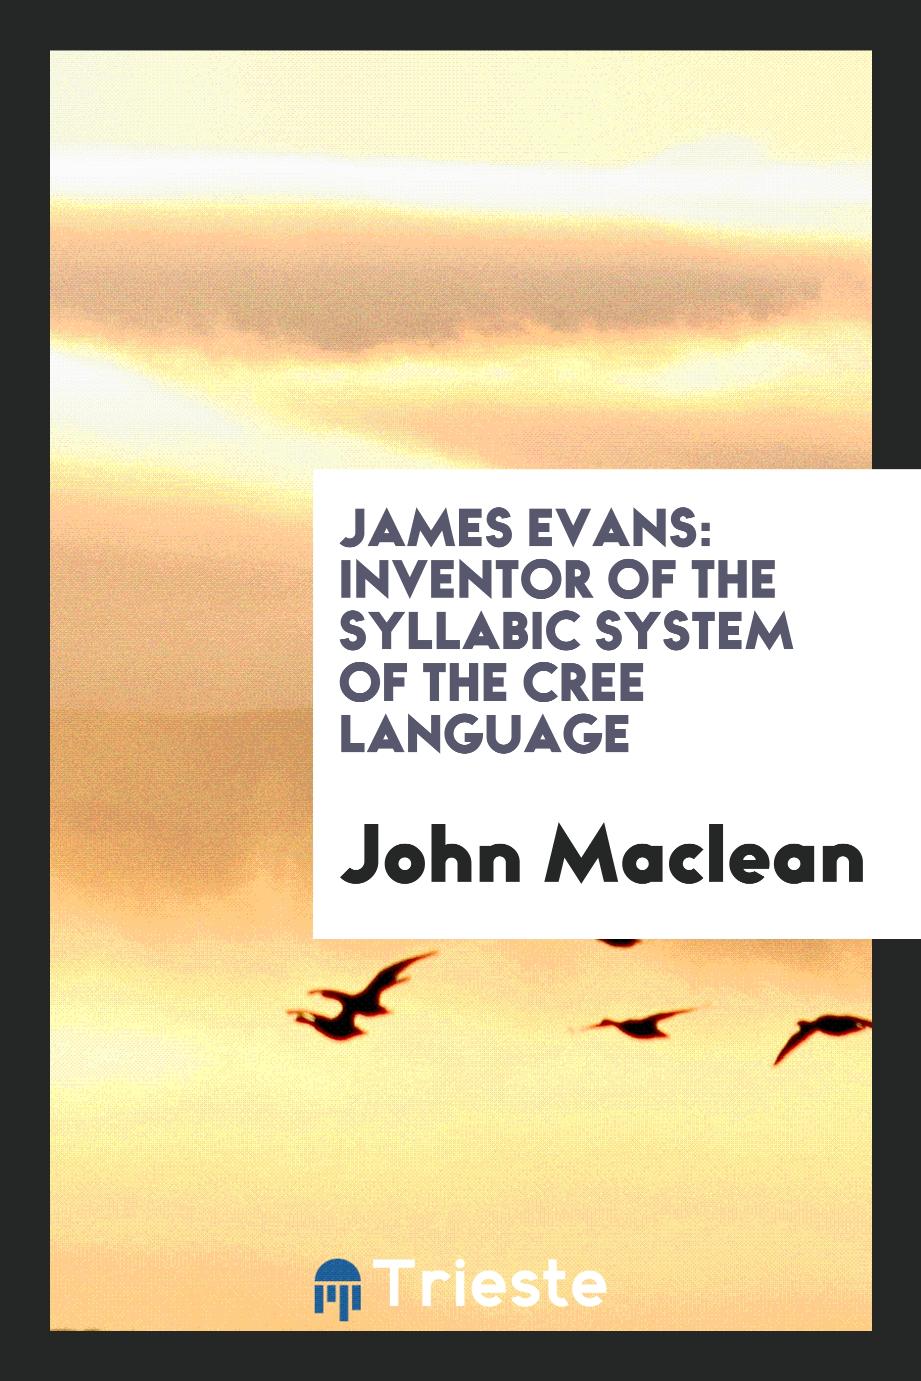 James Evans: inventor of the syllabic system of the Cree language